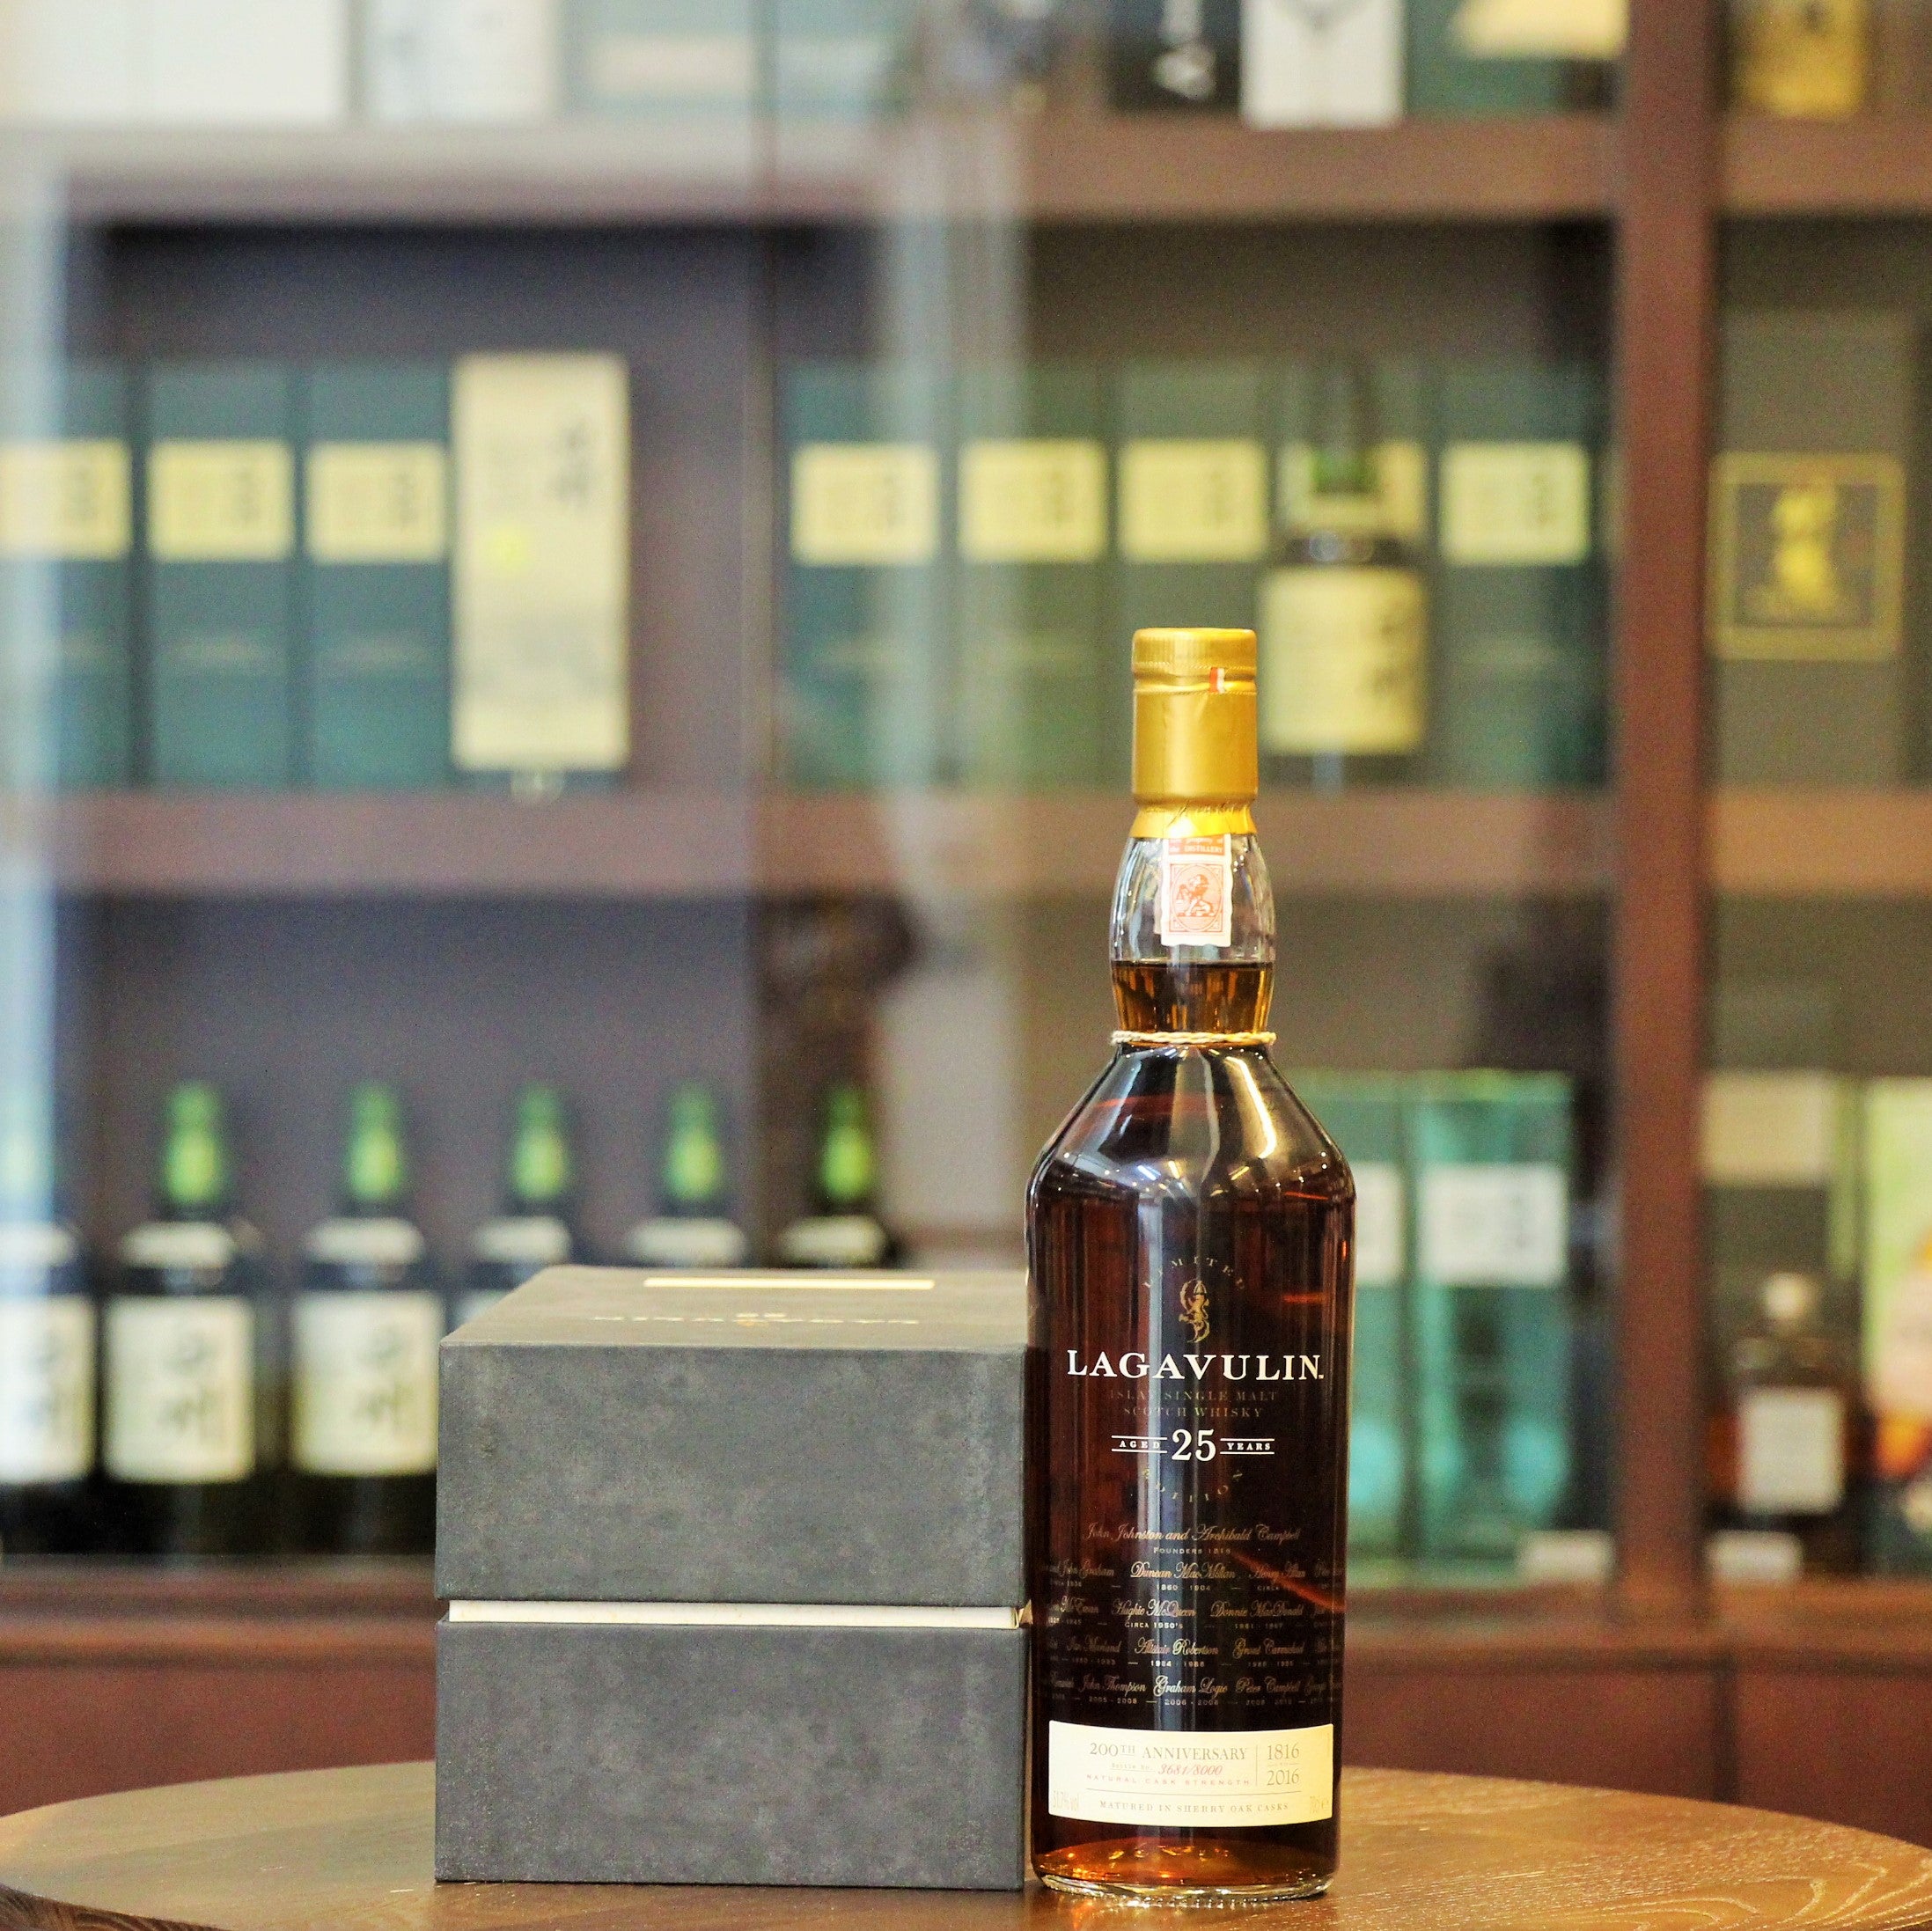 This limited edition release from Lagavulin celebrates the 200th Anniversary of this much famed Islay Distillery (1816 - 2016). Matured in Sherry Oak Casks, 8000 bottles were released. Please note that the bottle number is for reference only. Rated 92 points (5 Stars) by WhiskyFun. Rated 92+ on whiskybase over 350+ votes.